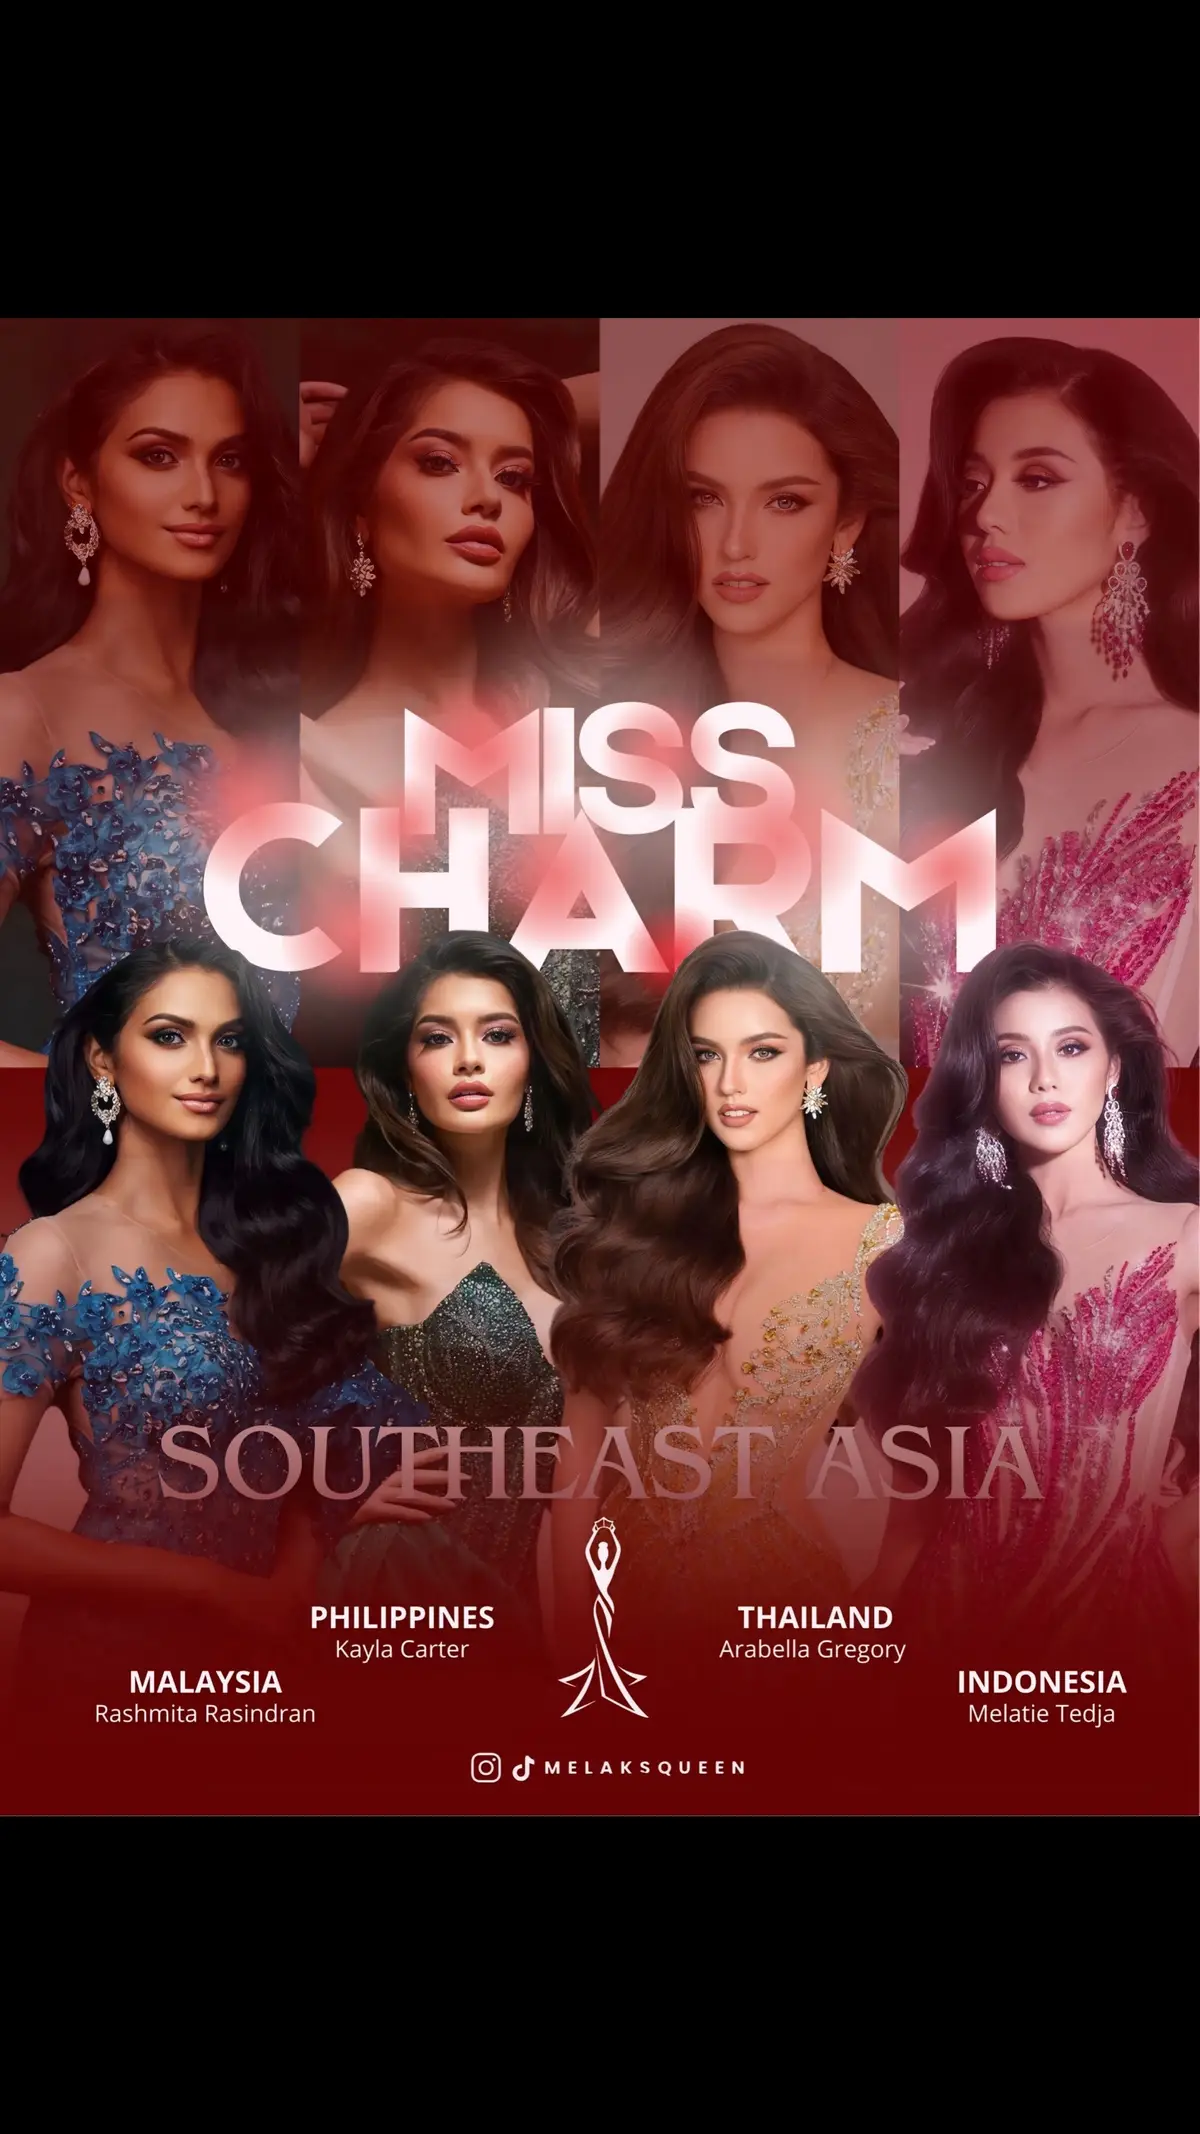 HELLO CHARM!! Here are some of our Southeast Asian representatives at Miss Charm 2024 What are our chances for Miss Charm 2024?? Can't wait for the complete lineup!! #misscharm #misscharm2024 #indonesia #thailand #philippines #malaysia 